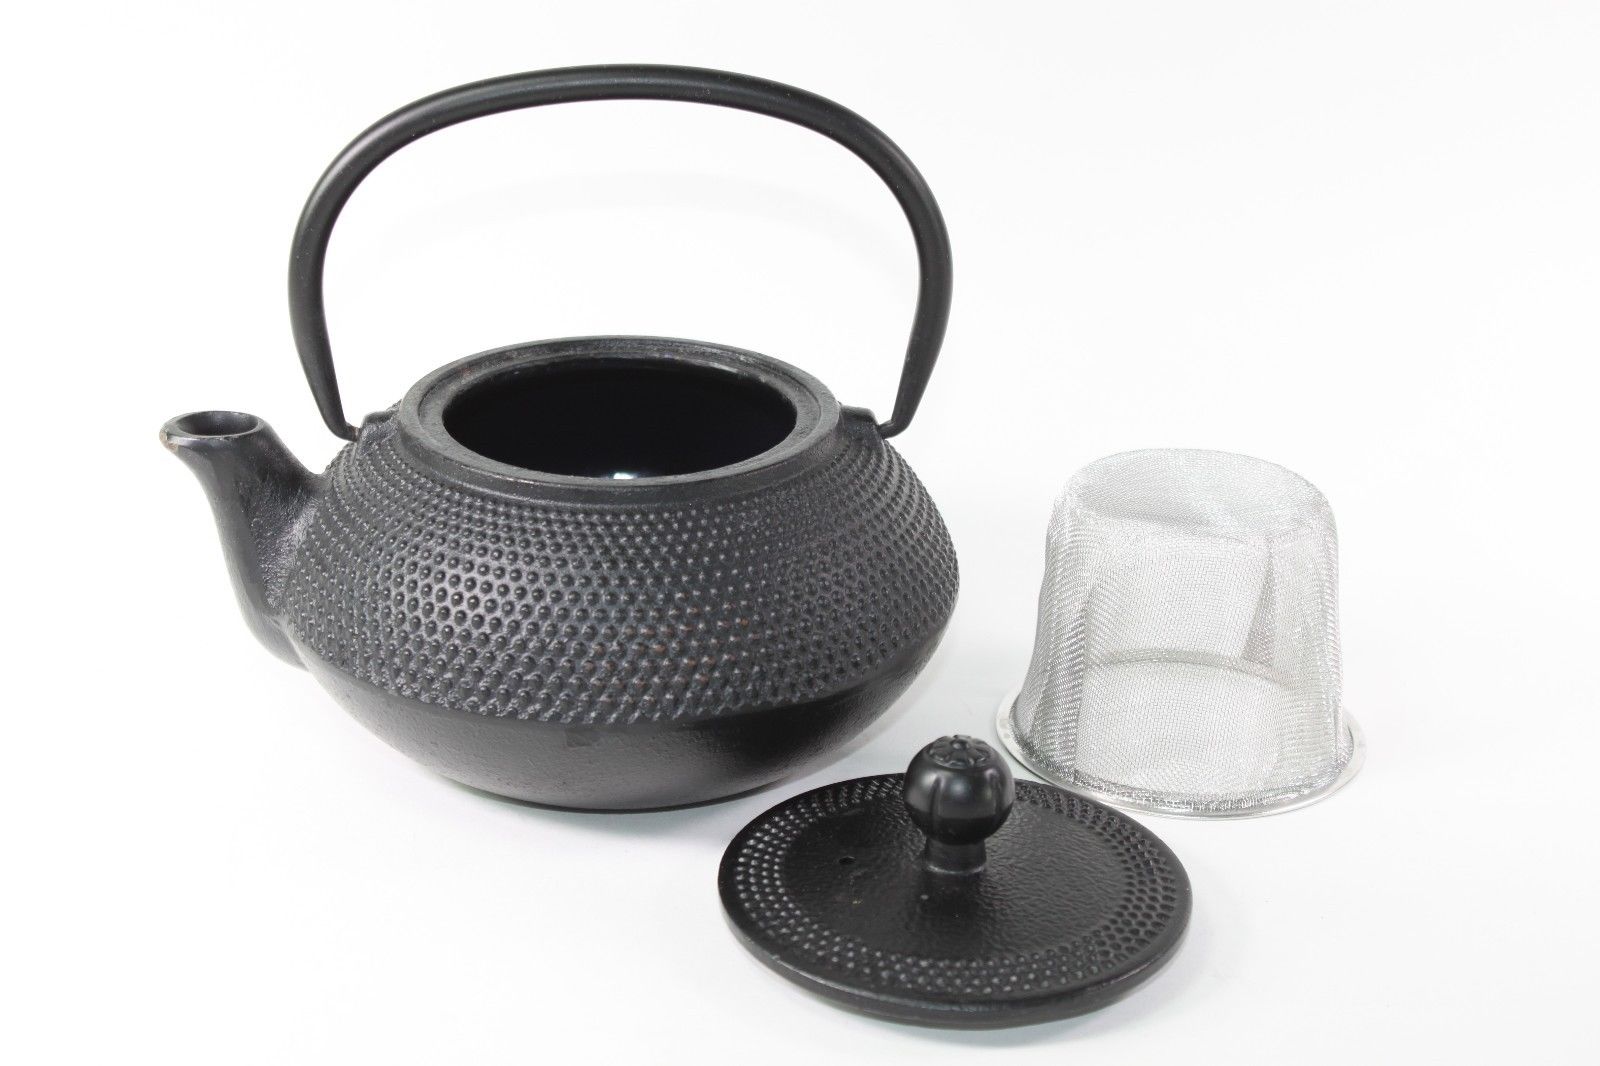 24 fl oz Black Small Dot Japanese Cast Iron Teapot Tetsubin with Infuser Filter - image 2 of 4